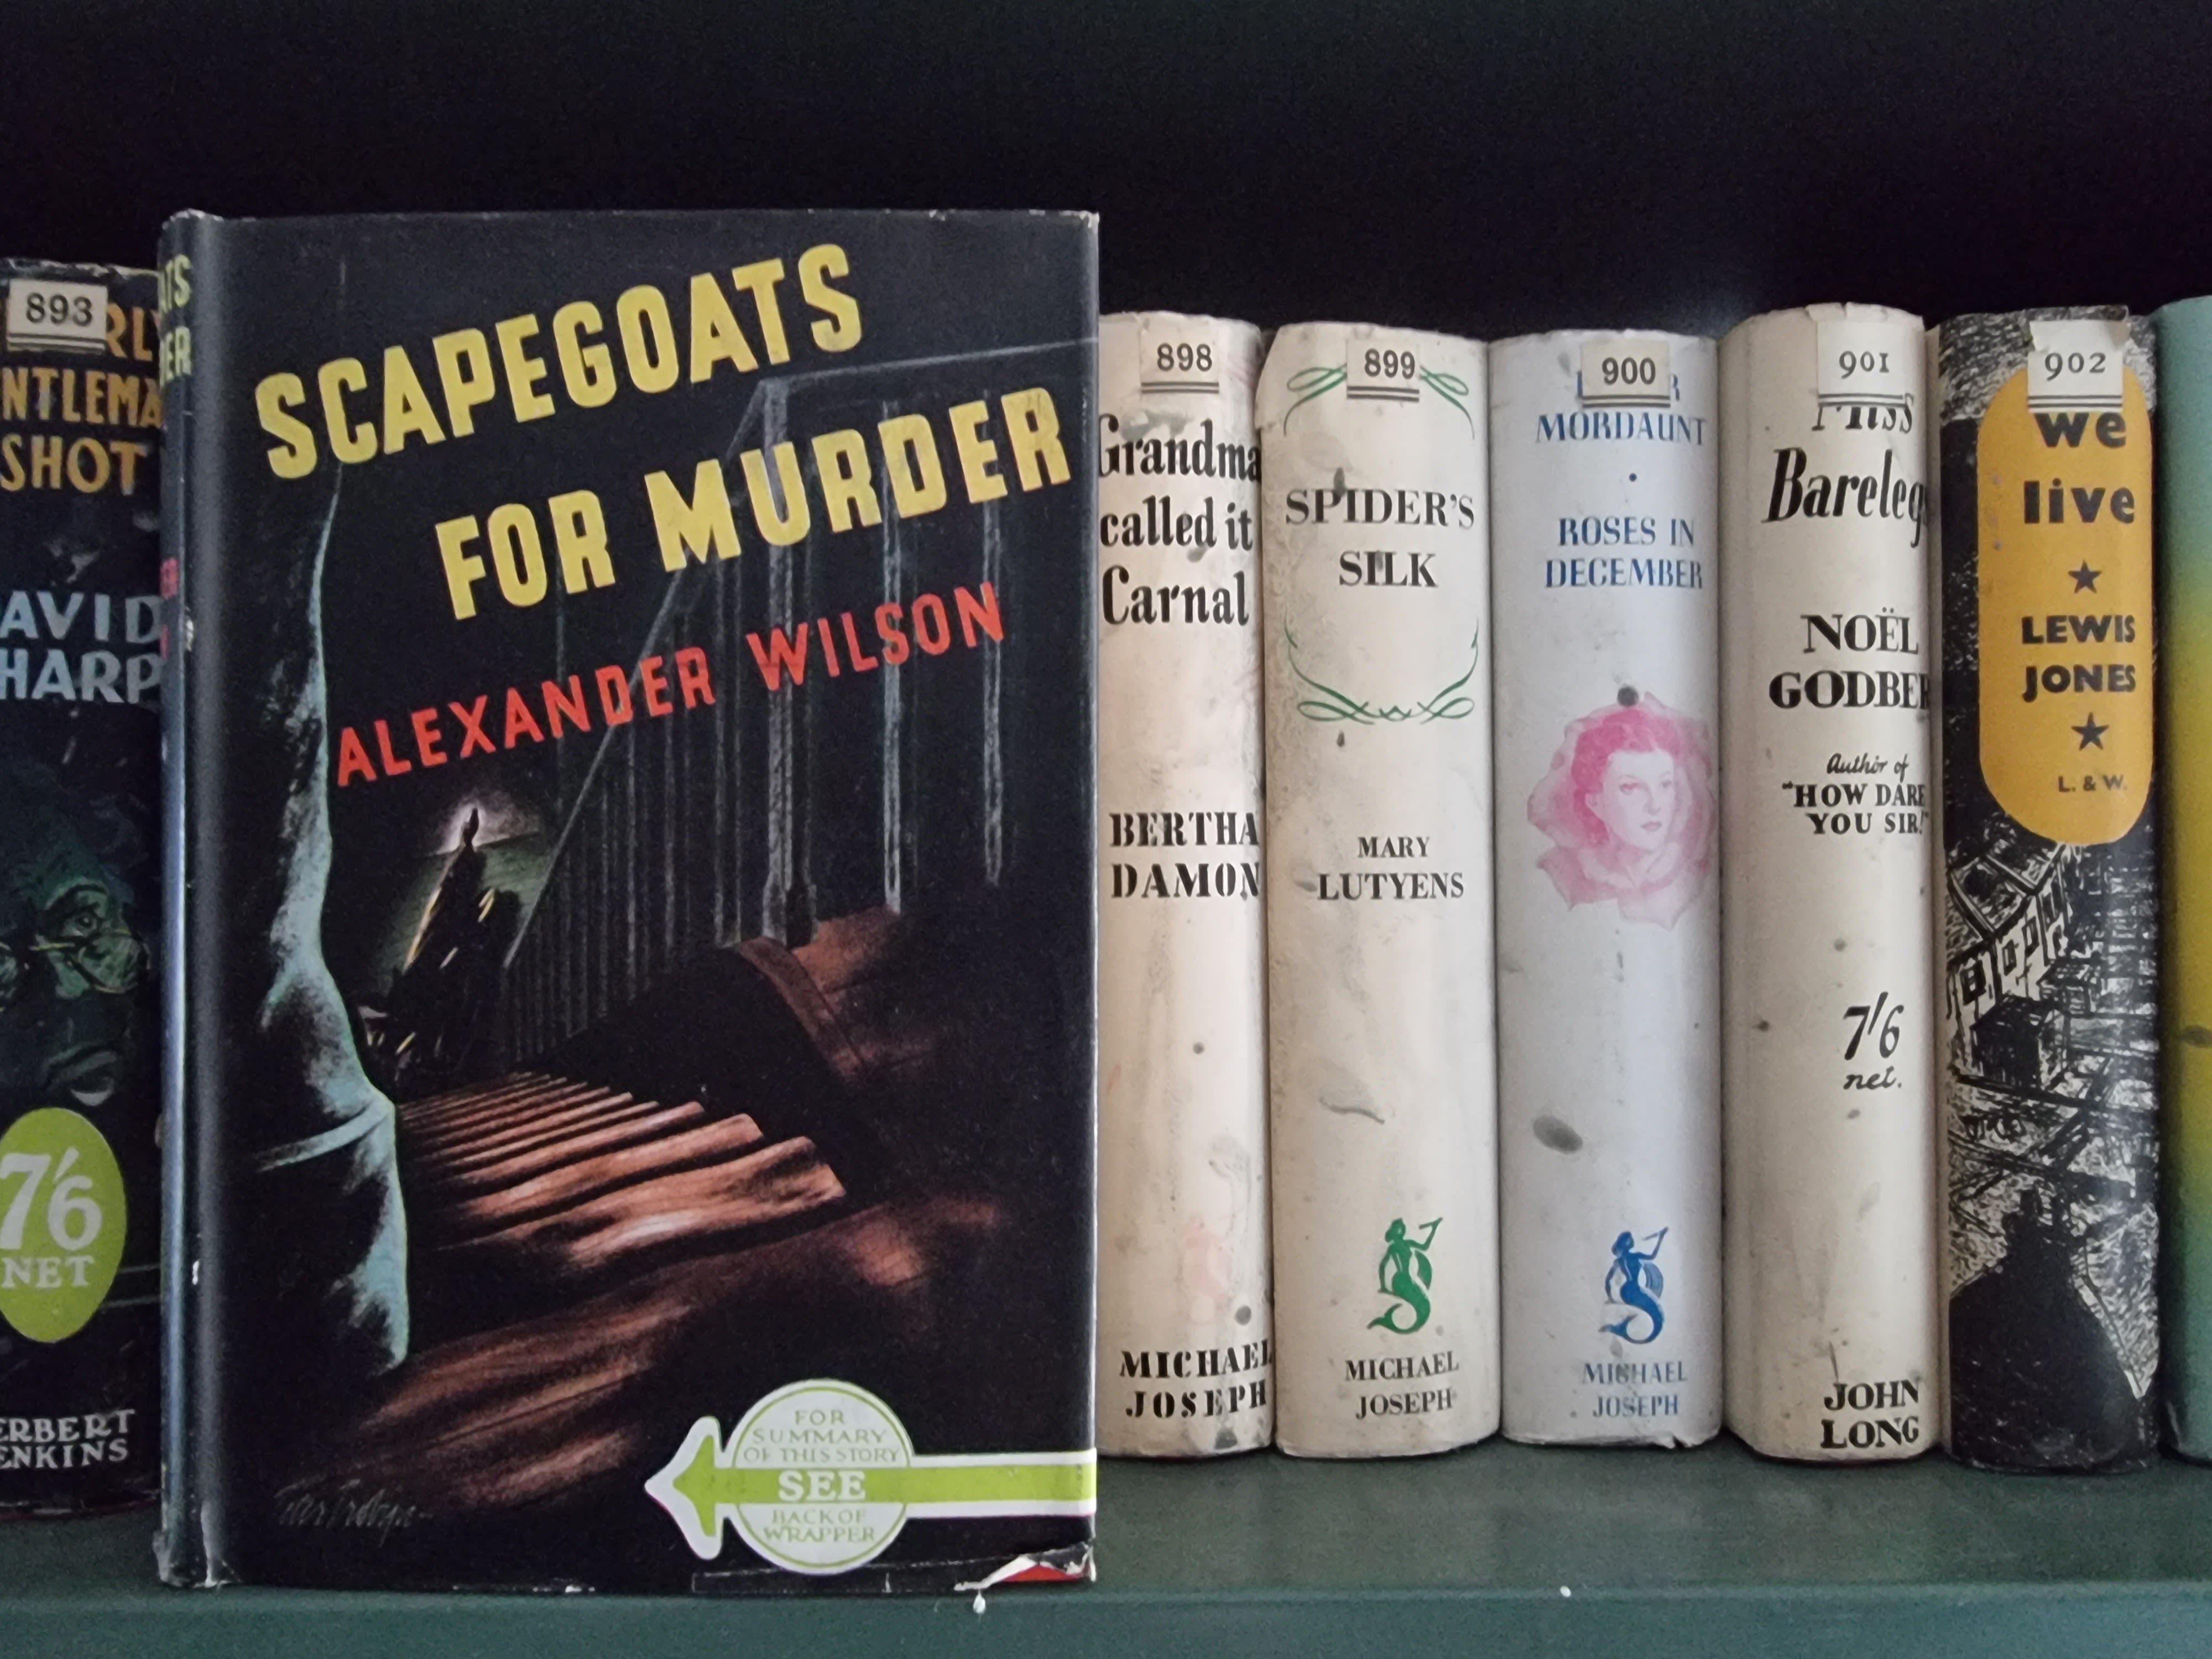 The cover of a crime novel, Scapegoats for Murder, from the University Library's Tower collections.